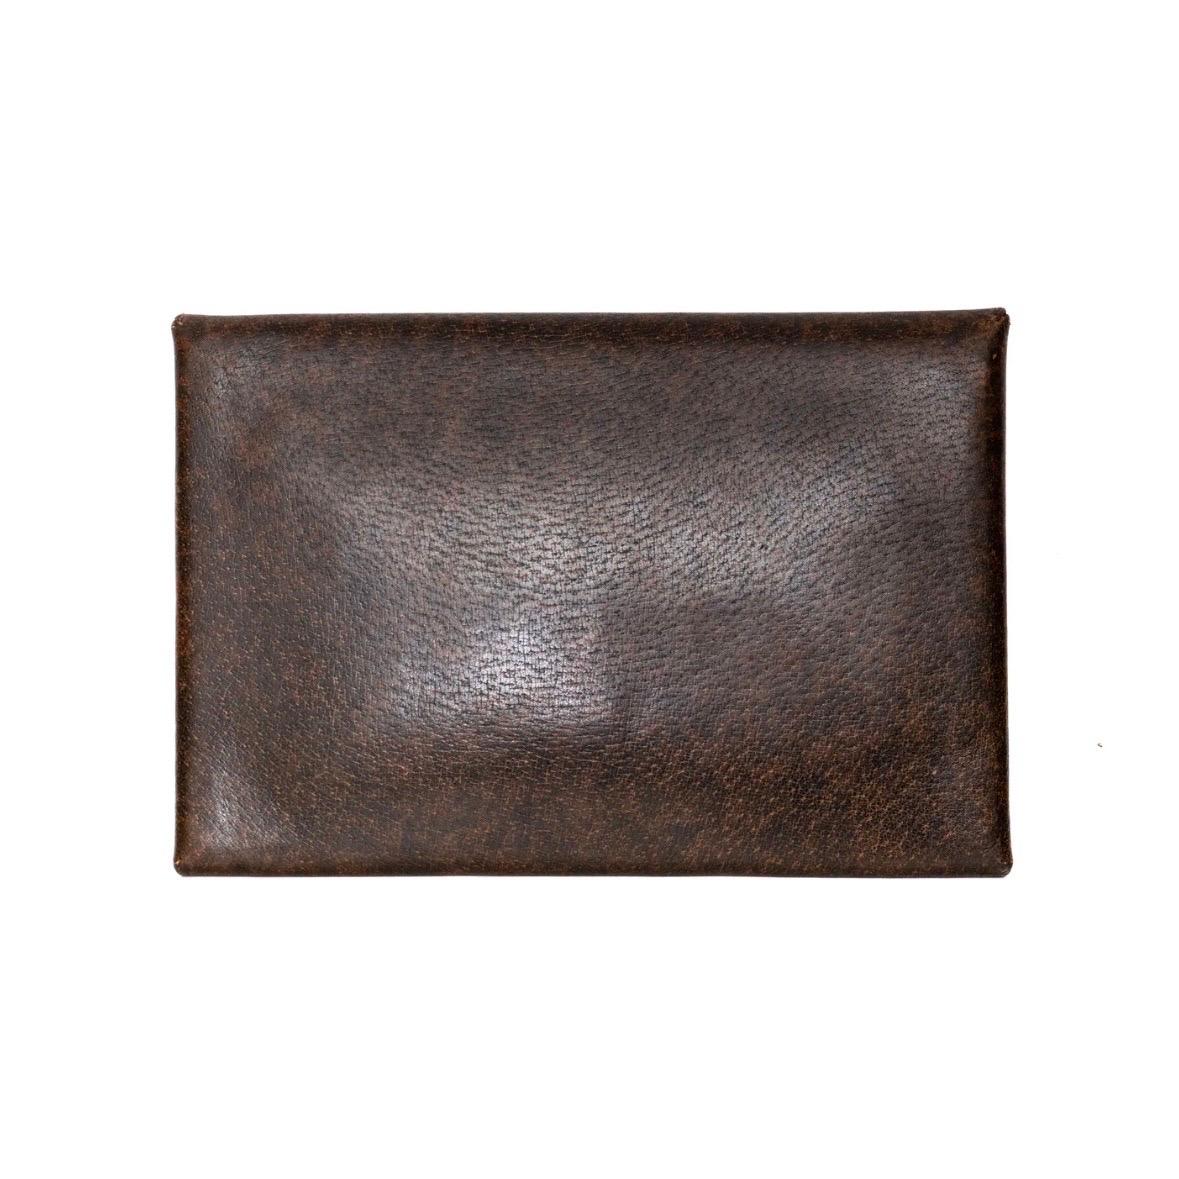 Brown leather envelope clutch by Gucci
Circa 1970s
Snap button closure with gold-tone bridle charm
Interior pocket beneath flap
Suede leather lining 
Clutch size
100% leather
Made in Italy
Condition: excellent vintage condition; minor pen marks